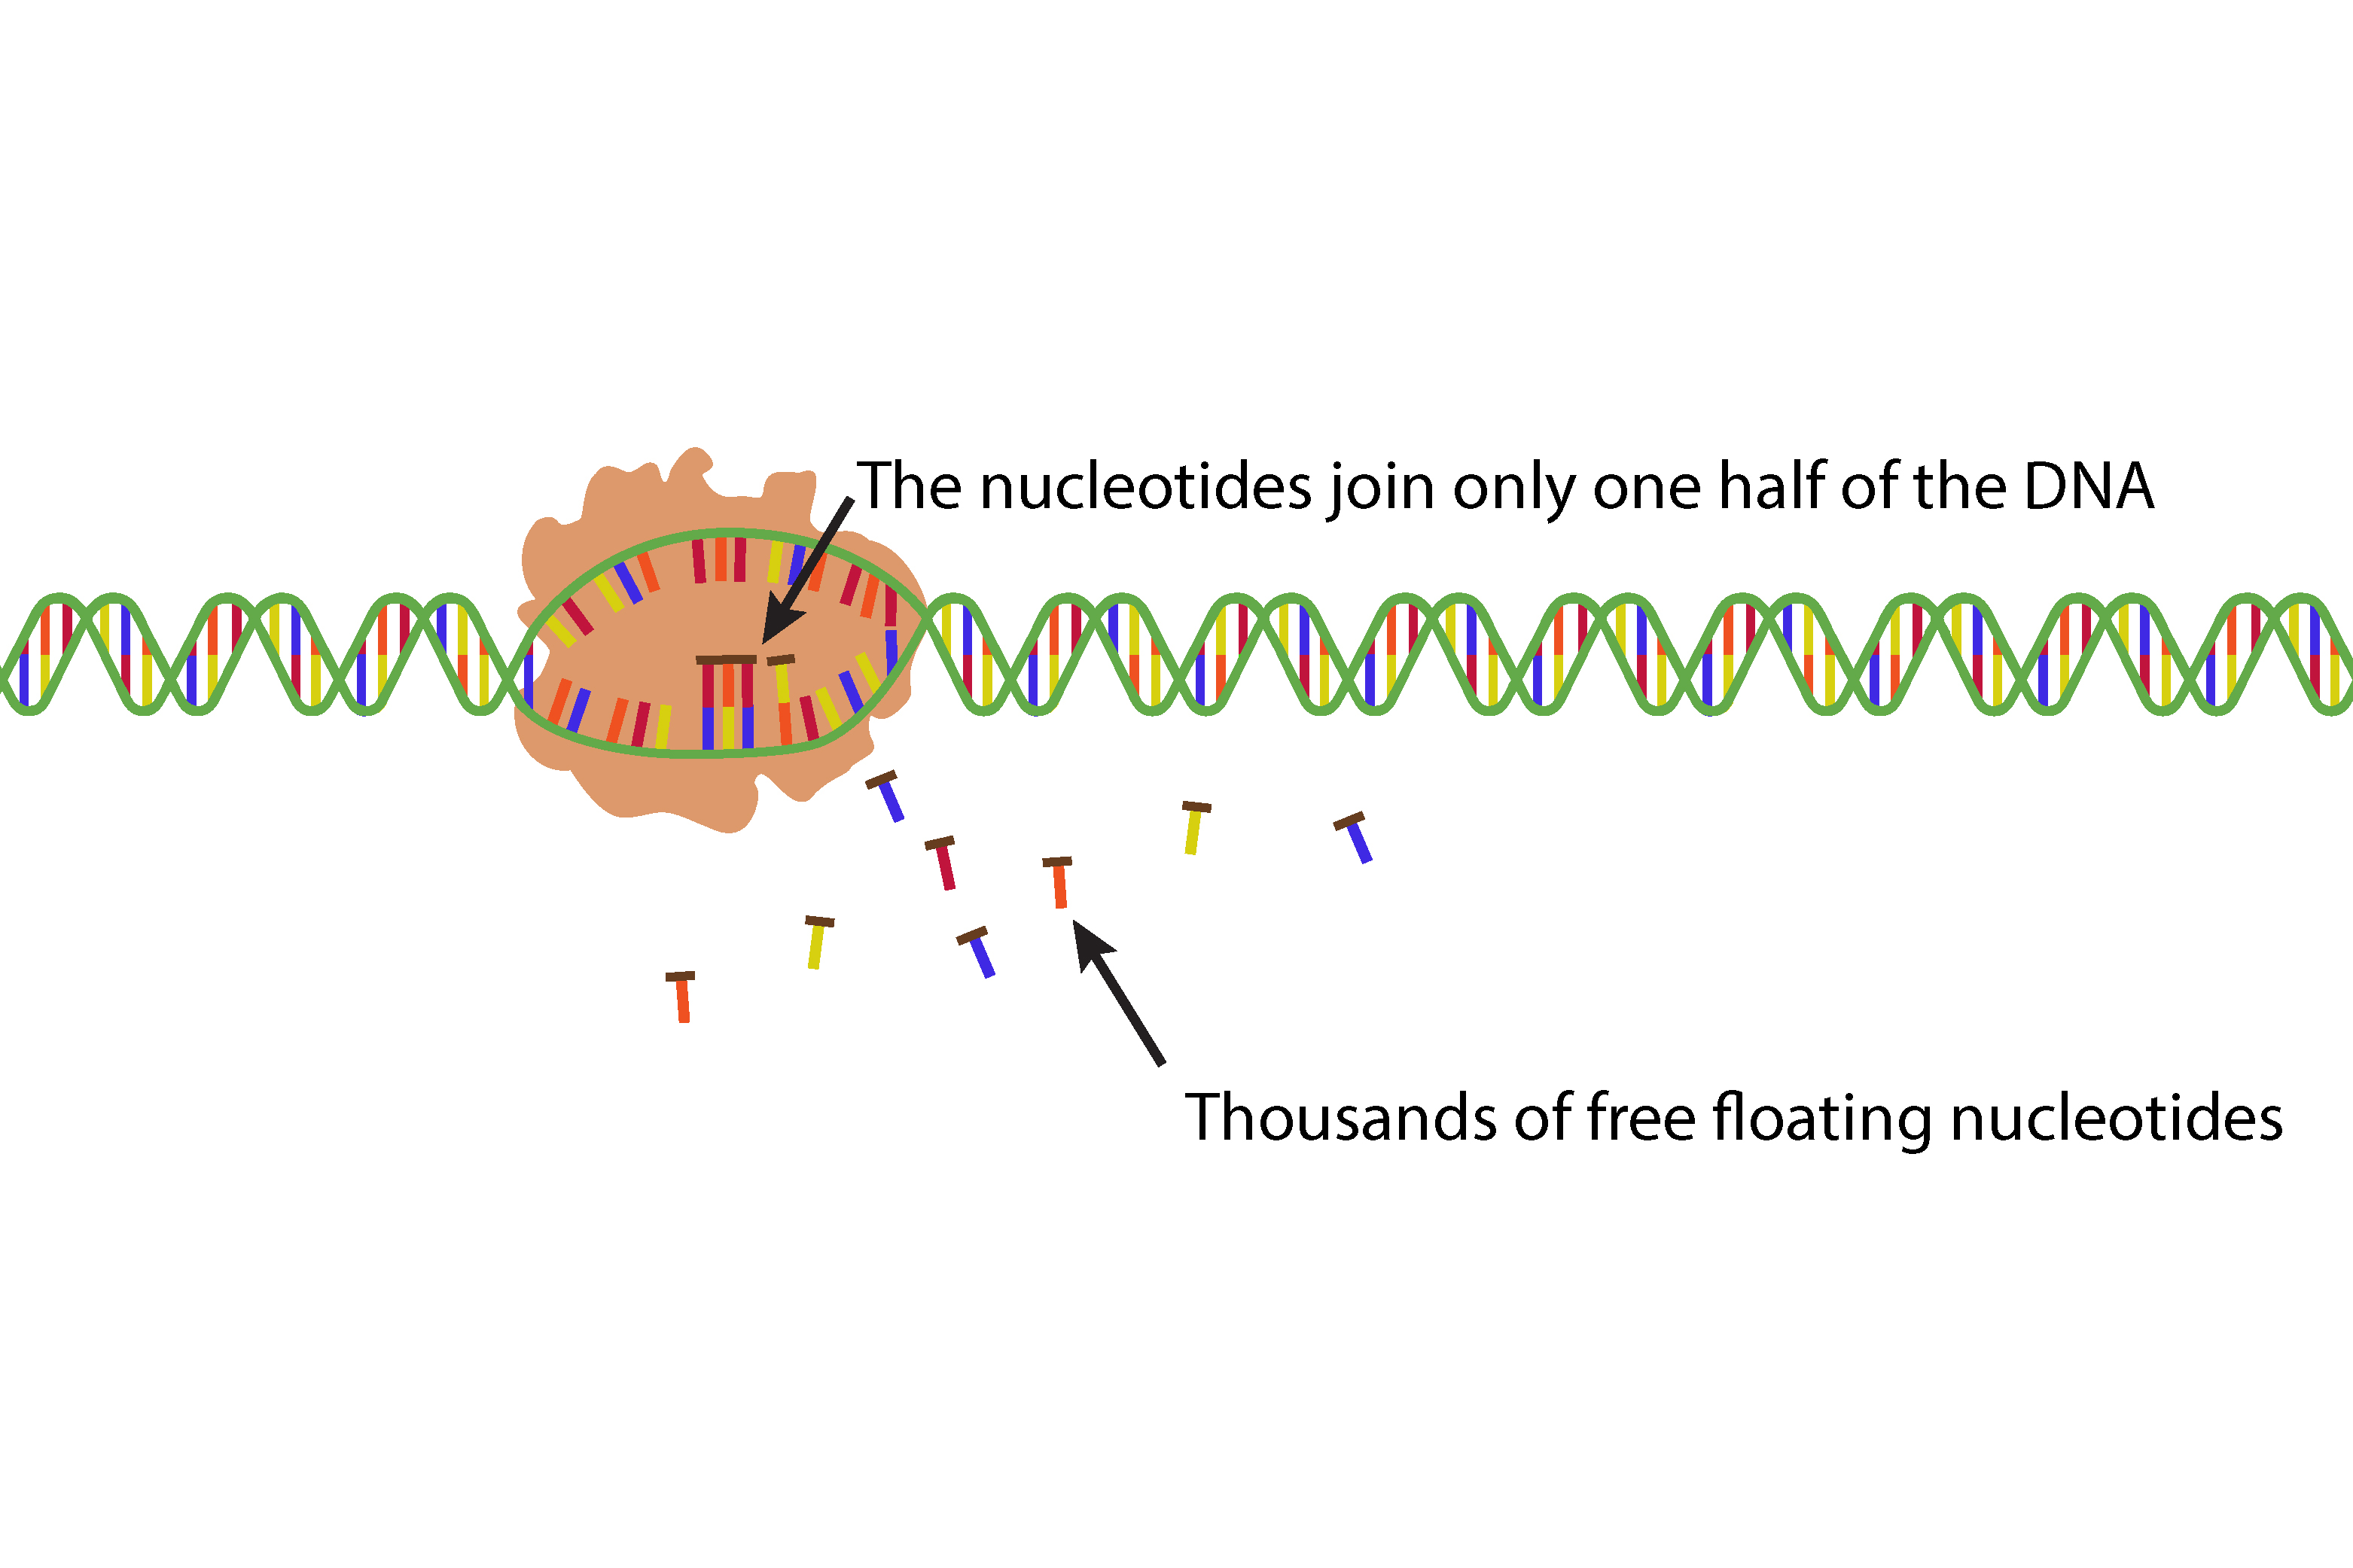 As the enzyme reads the DNA, thousands of free floating nucleotides join the opened DNA only at the base